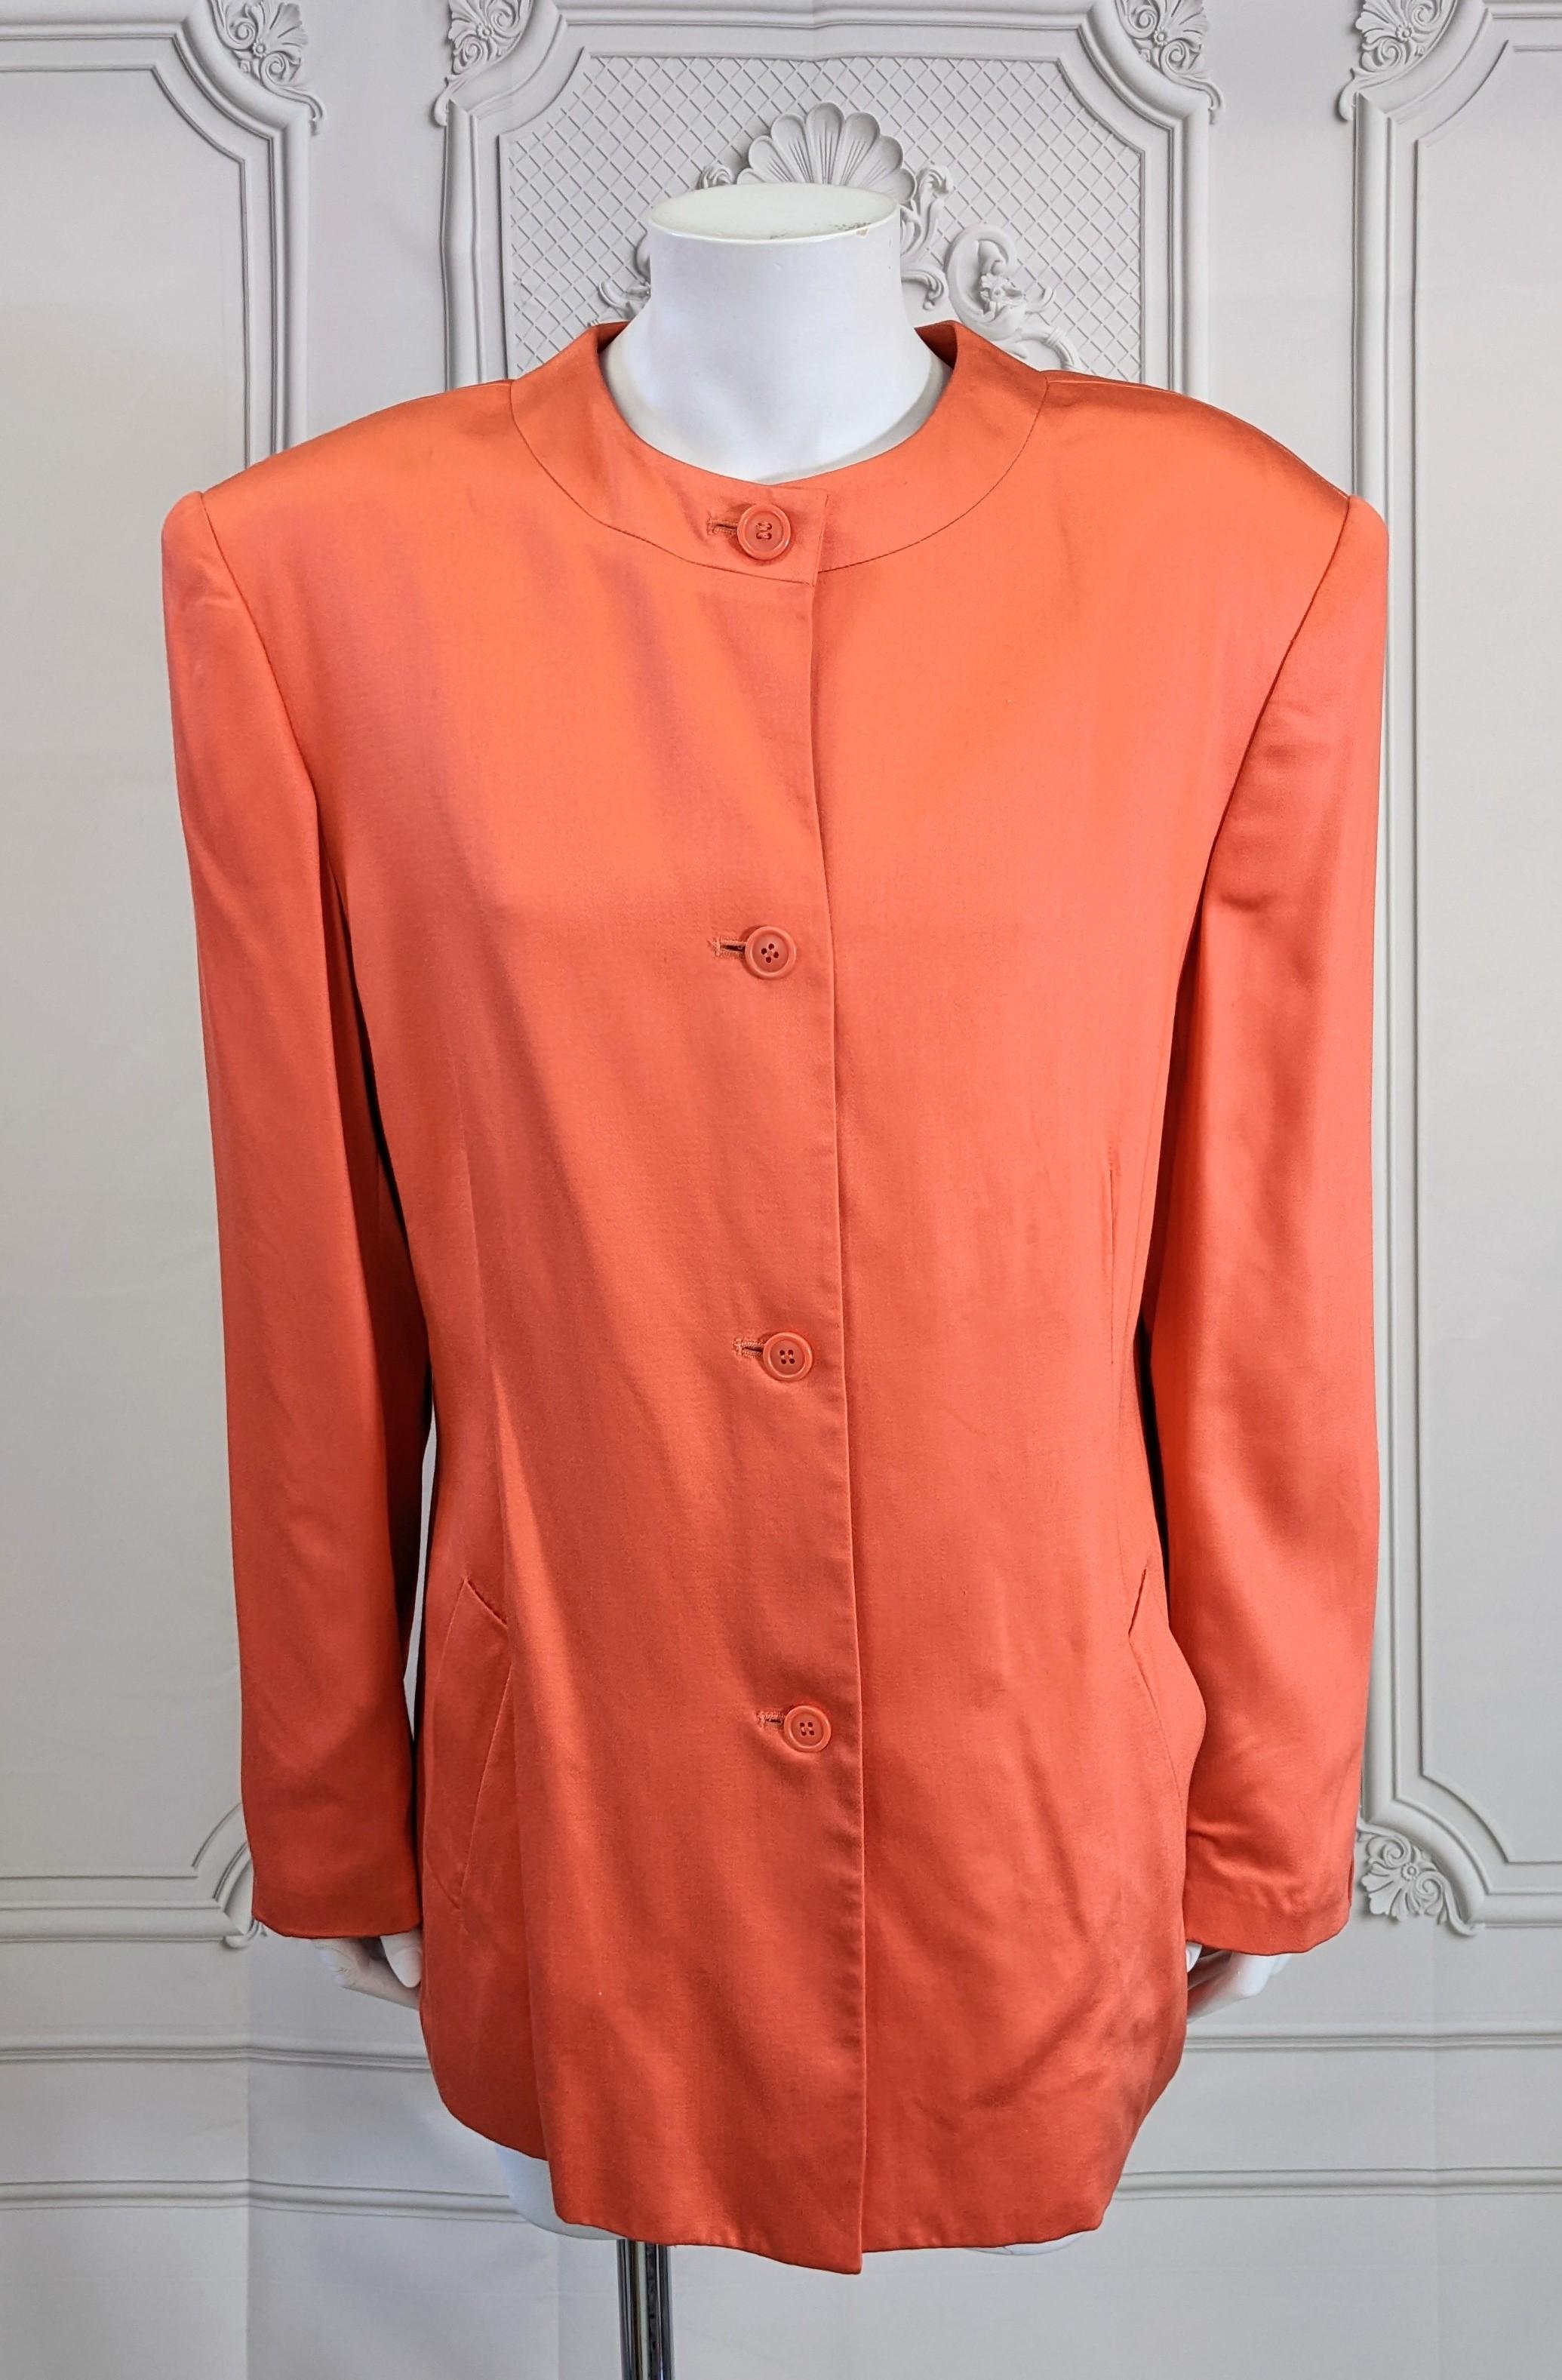 Stephen Sprouse Orange Twill Nehru style Jacket for one of his iconic monochromatic rocker suit looks. Soft rayon shiny satin twill is straight cut with front buttons, strong shoulders and slash pockets. Size 10 USA. 1980's. 
Probably shown with